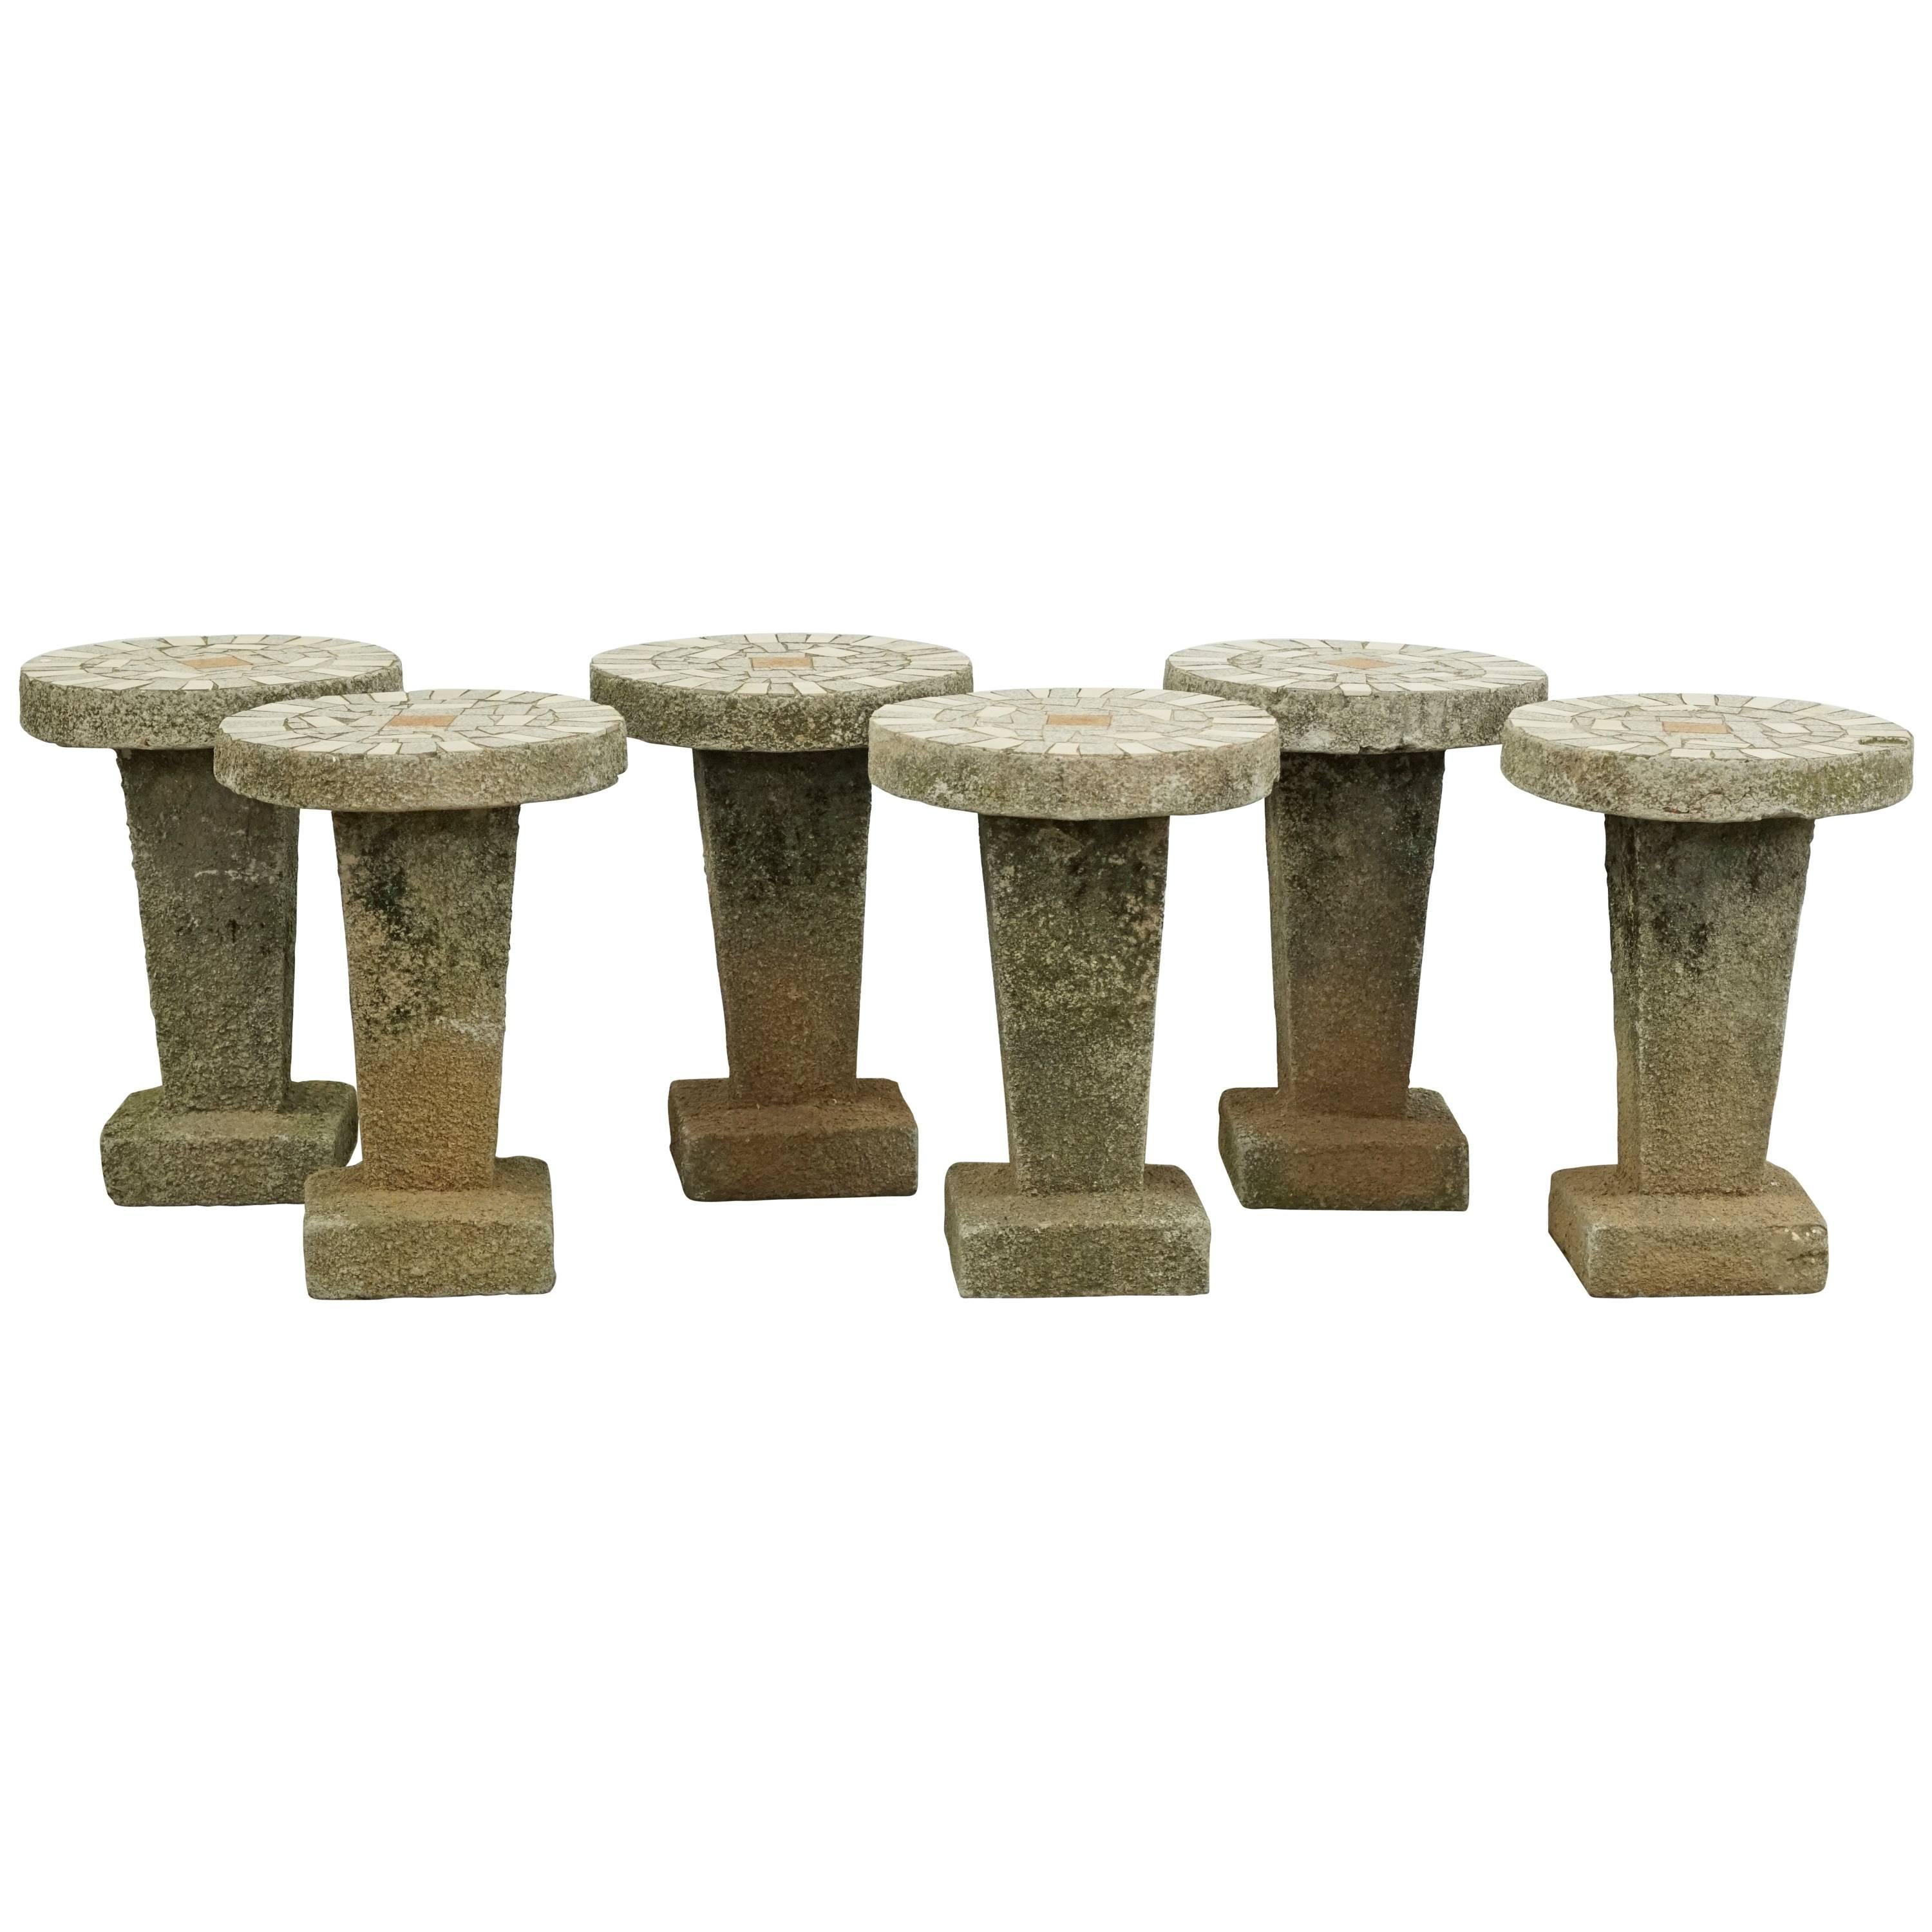 Cement and Mosaic Tile Top Stools